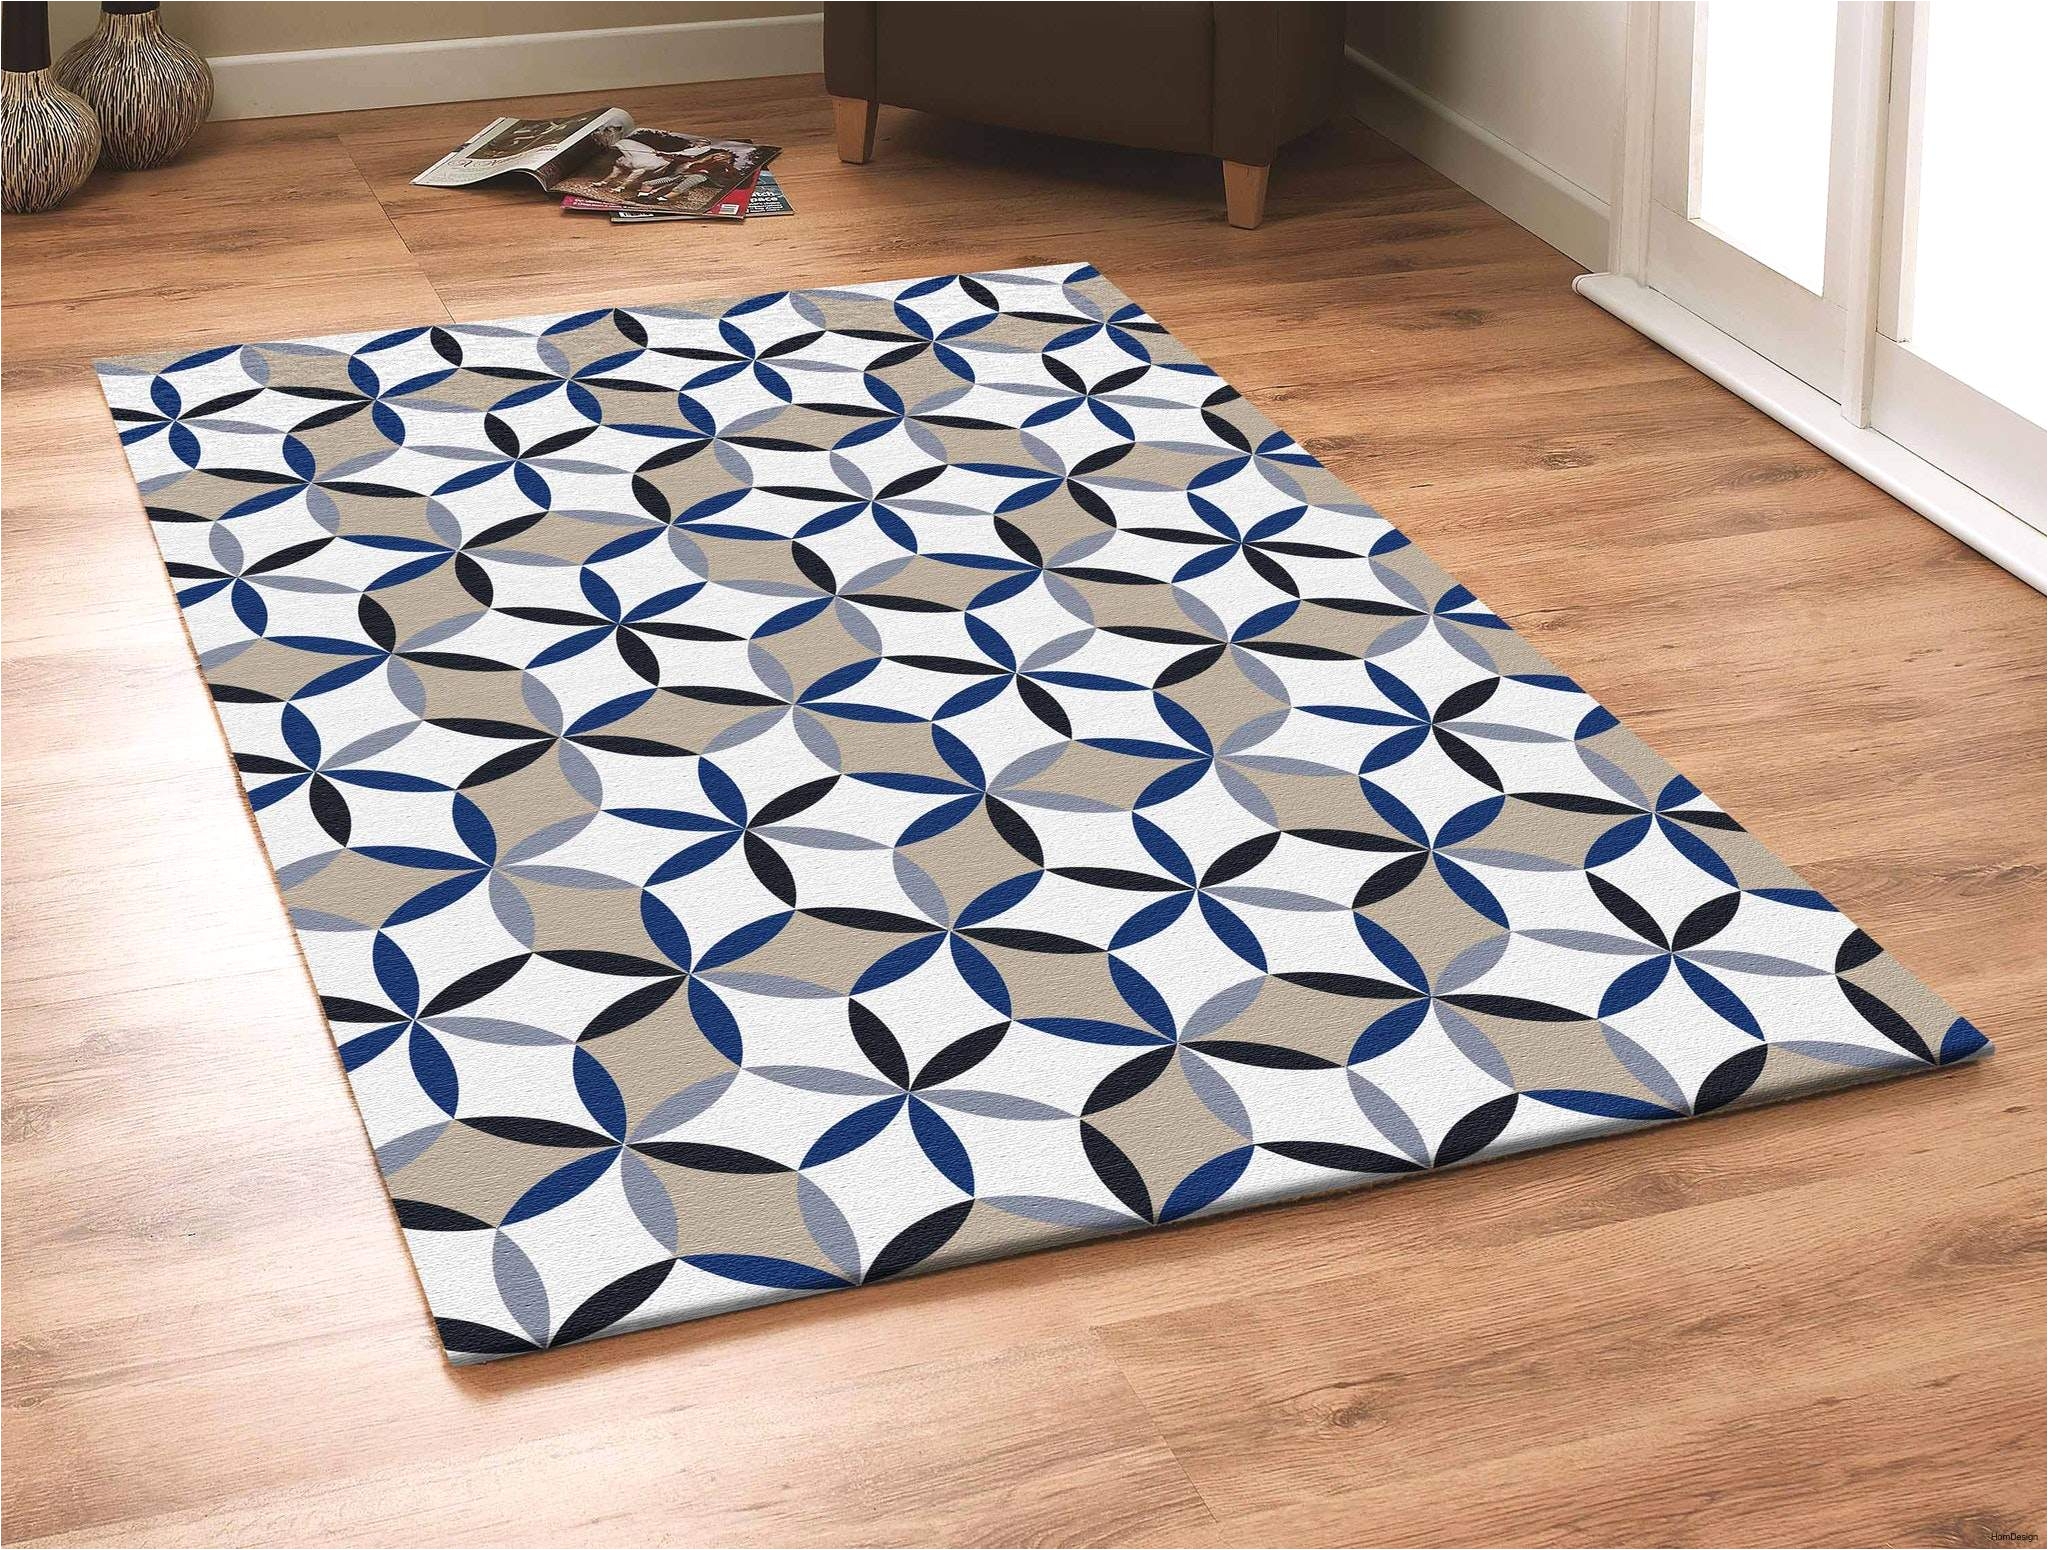 teal colored area rugs unique rugged new cheap area rugs blue rug as gold and white